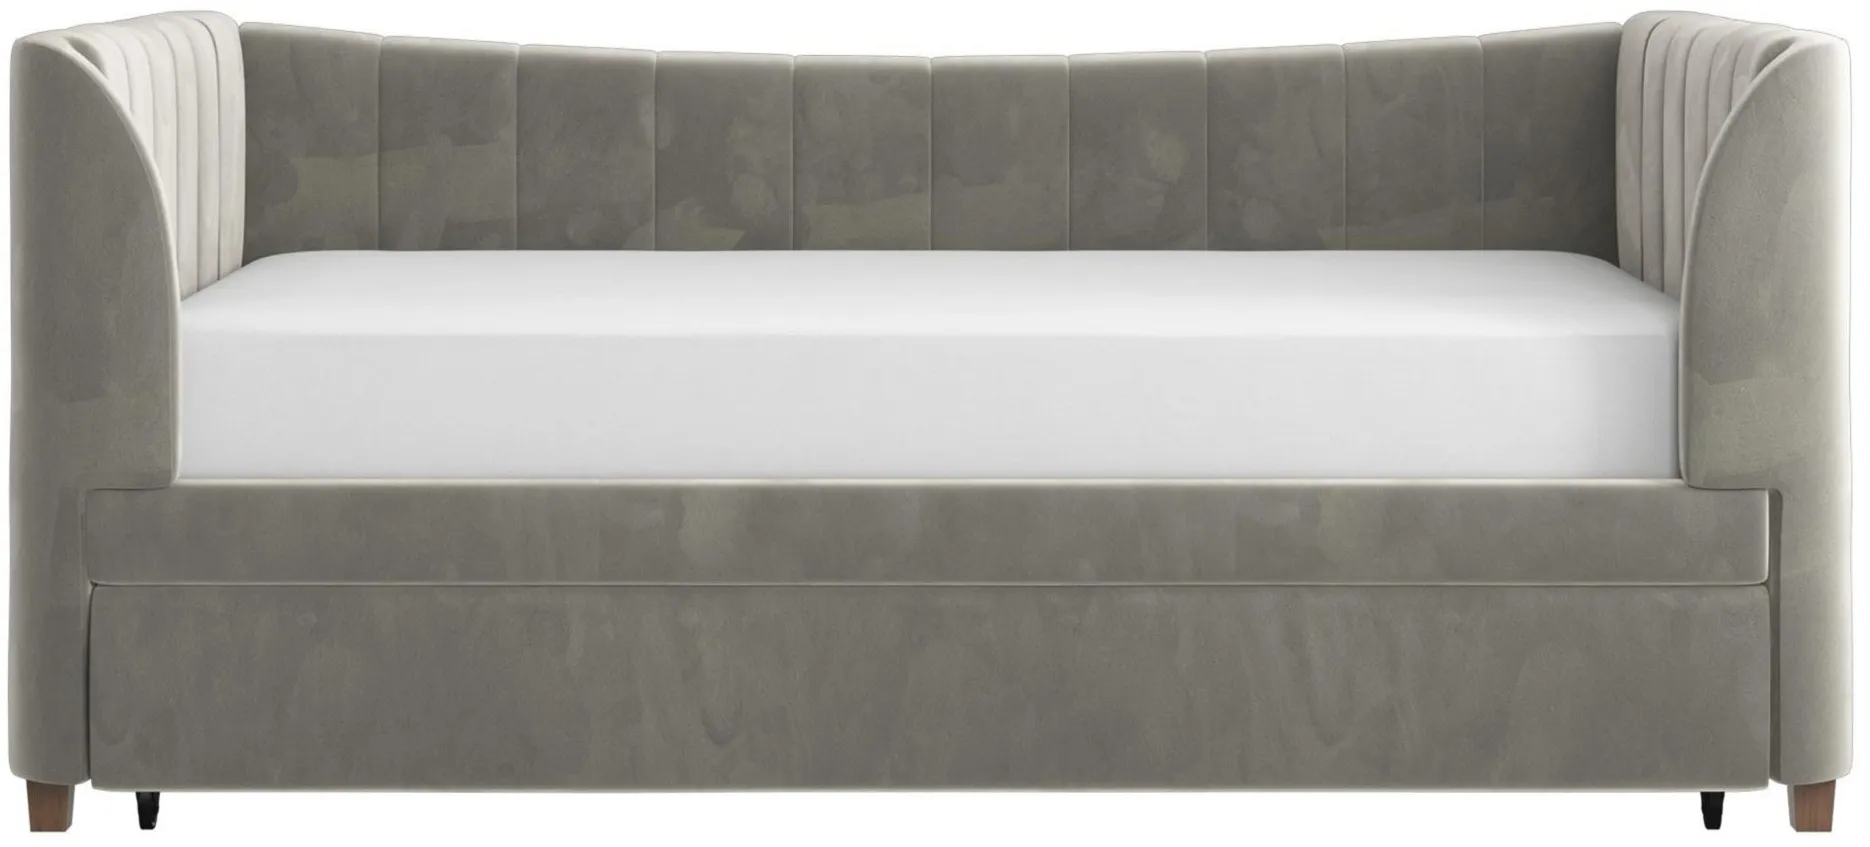 Little Seeds Valentina Upholstered Daybed with Trundle in Gray by DOREL HOME FURNISHINGS